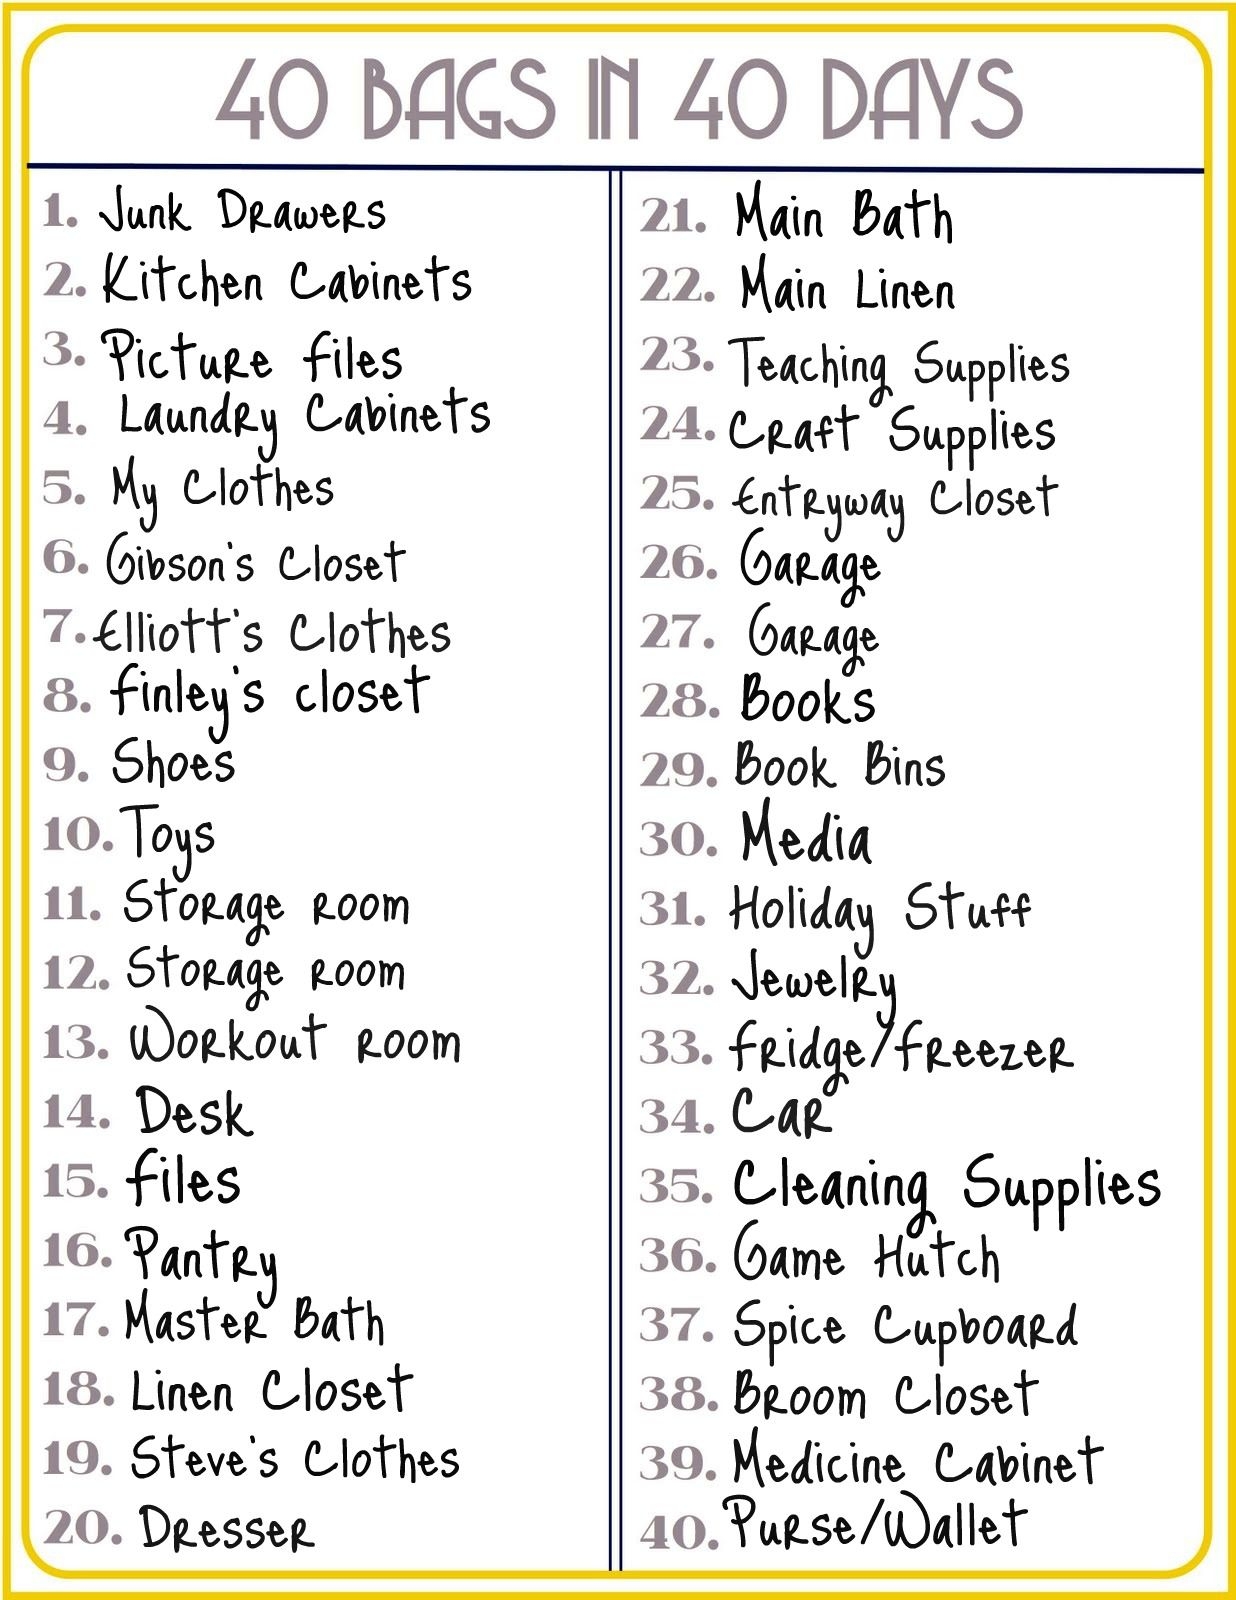 40 Bags In 40 Days Printable